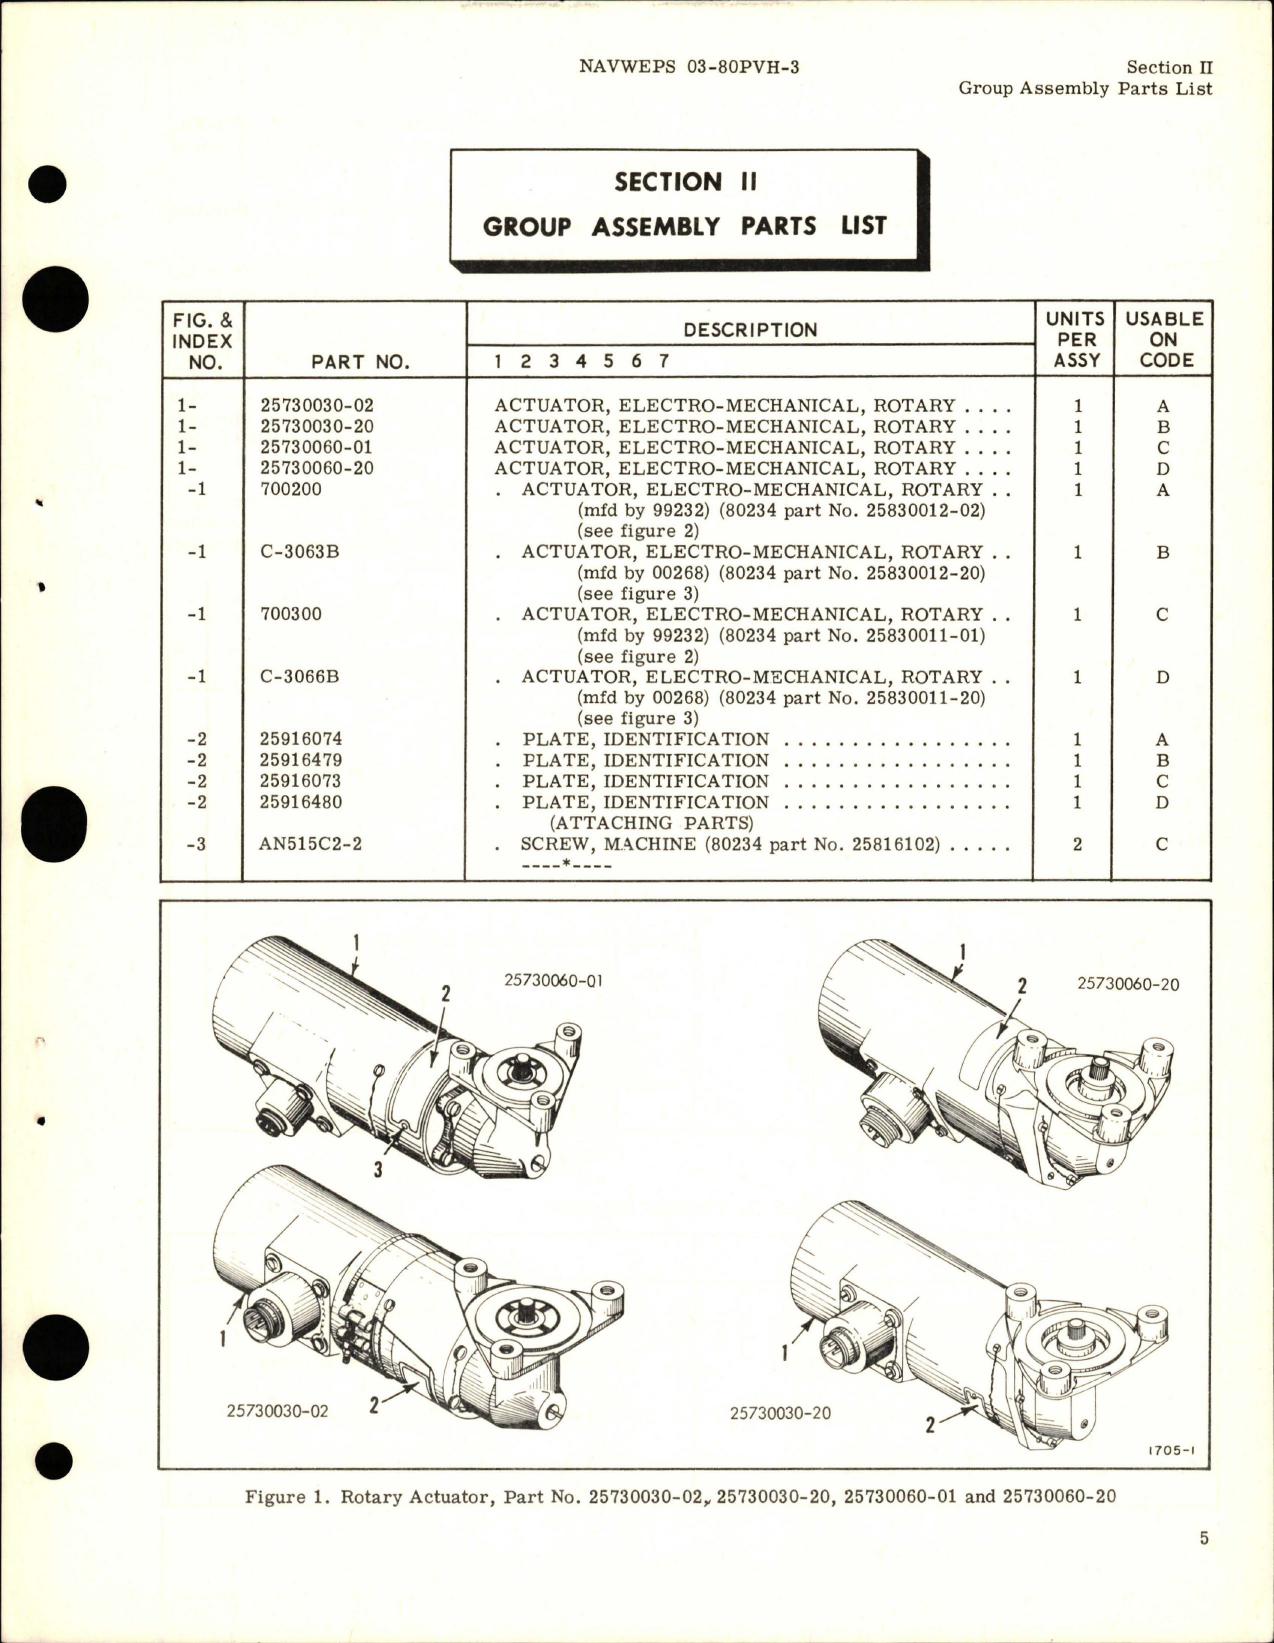 Sample page 7 from AirCorps Library document: Illustrated Parts Breakdown for Rotary Electro-Mechanical Actuator - Parts 25730030-02, 25730030-20, 25730060-01, and 25730060-20 